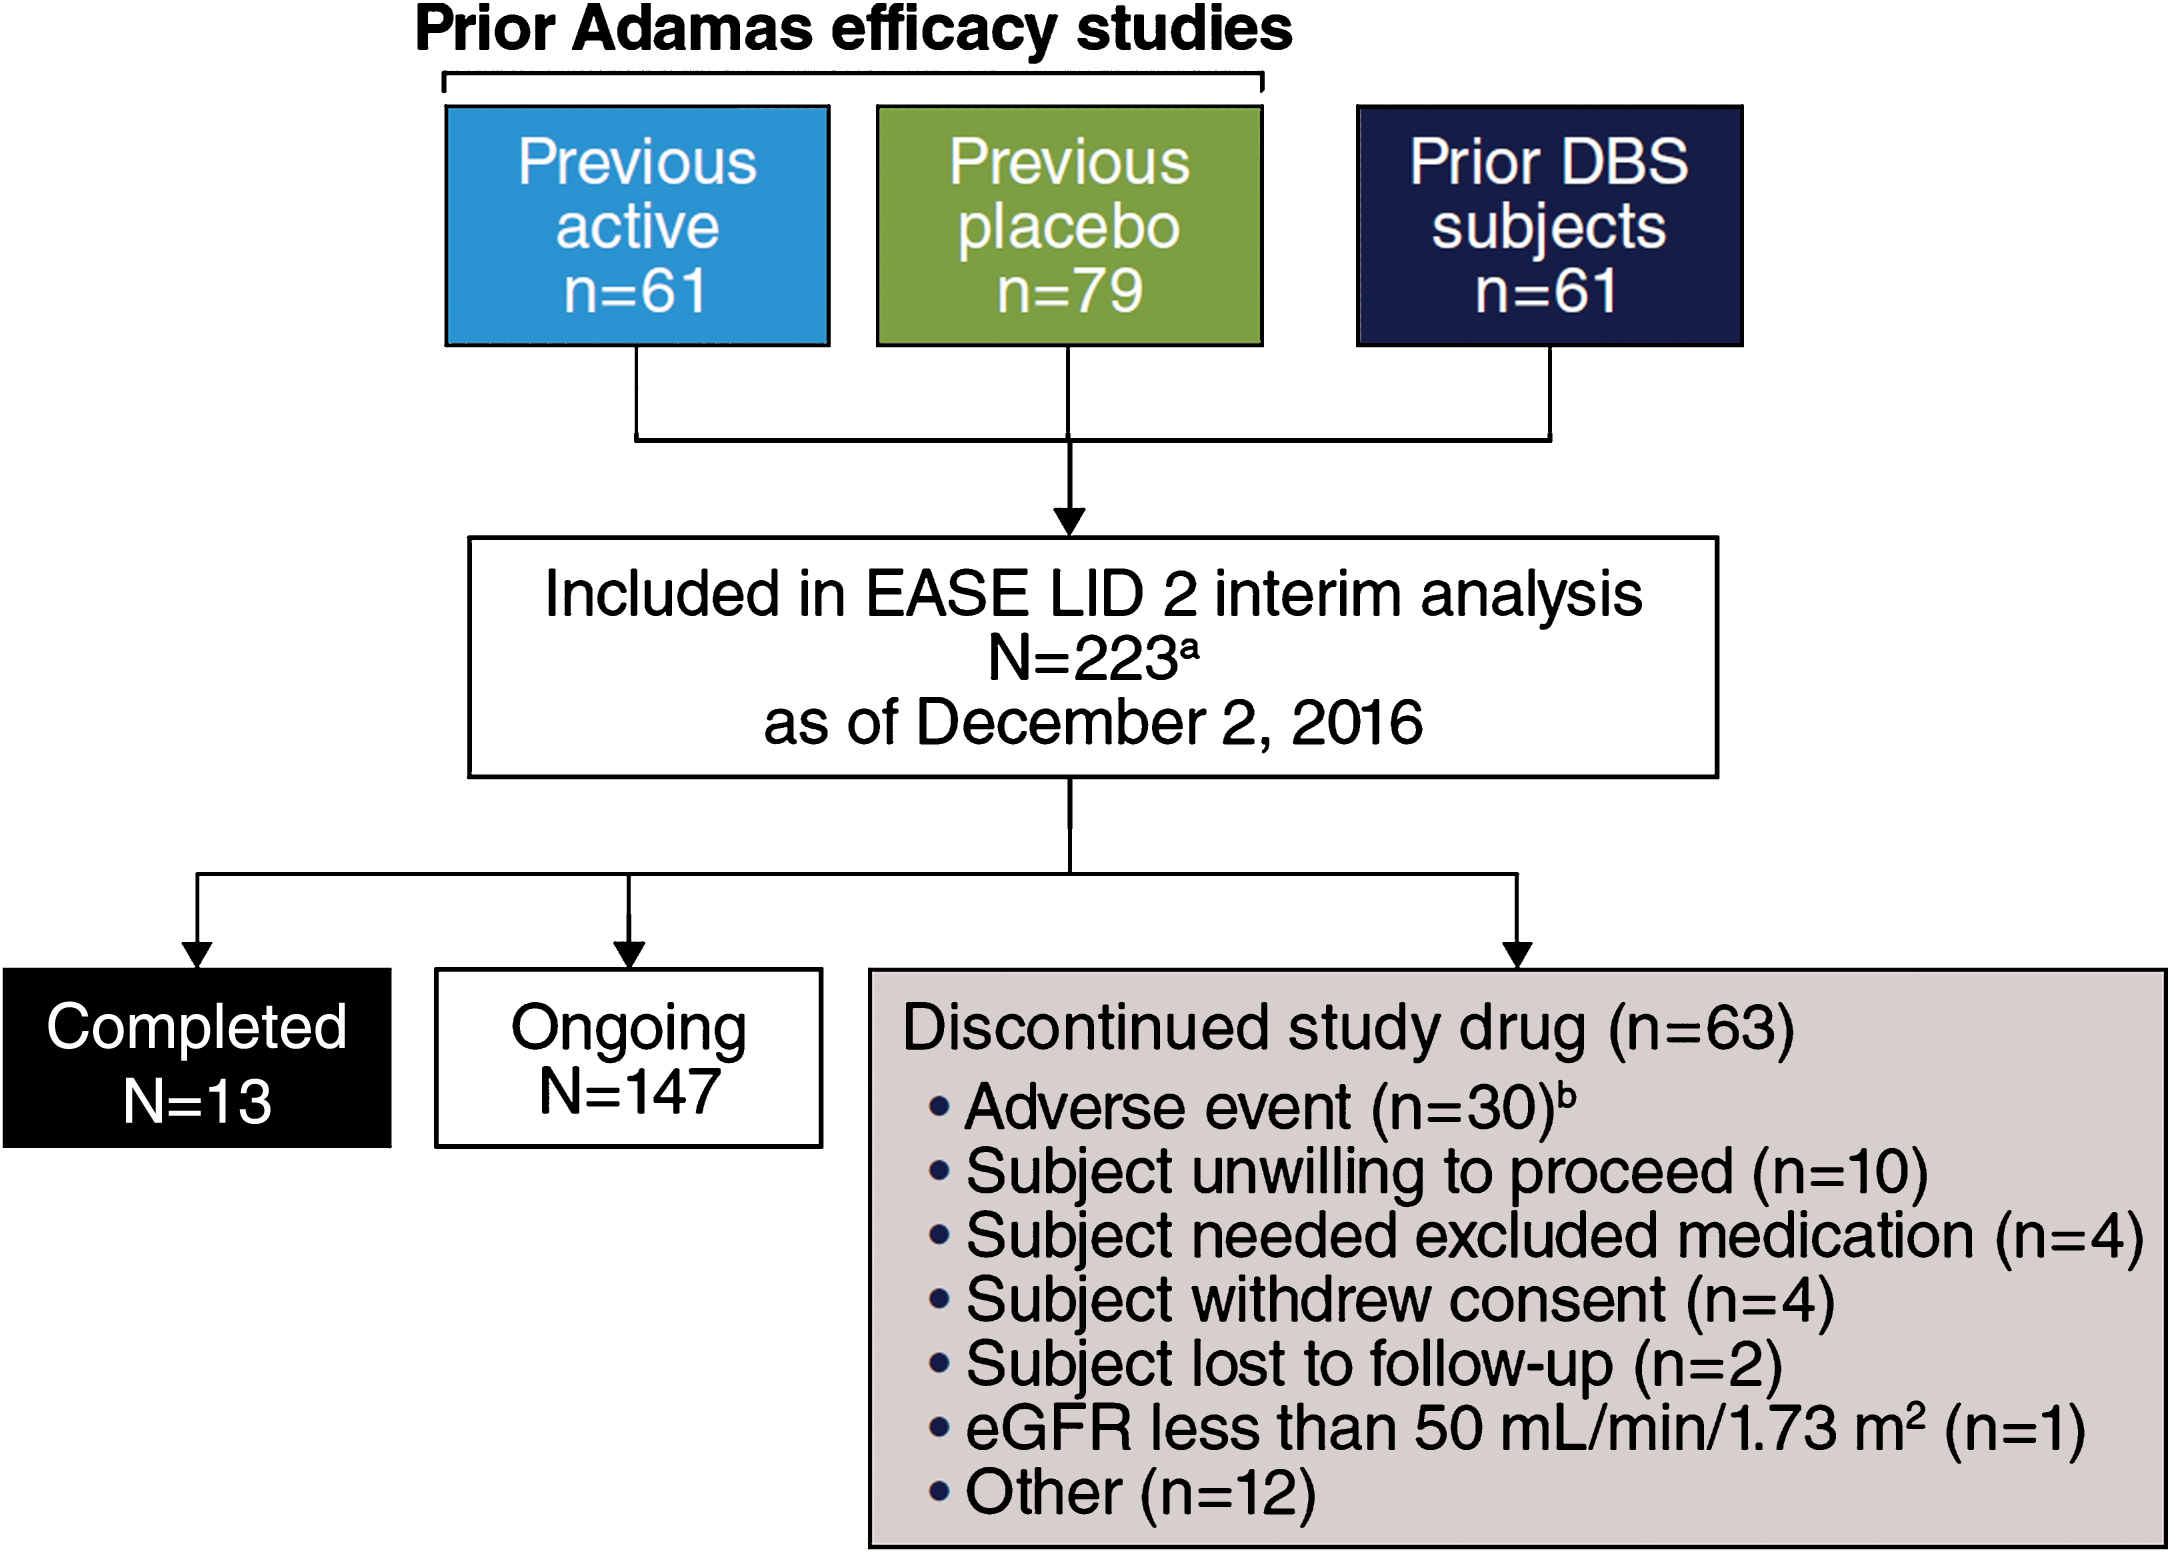 Trial Profile. aStudy includes 22 patients who enrolled after a time gap following participation in double-blind studies (EASED, EASE LID, EASE LID 3) and were not summarized as a subgroup in subsequent analyses due to small sample size. bCase report form in interim data-cut for 2 additional patients reported study drug withdrawal as action taken in response to AE, while disposition record reported “other” and “ongoing.”